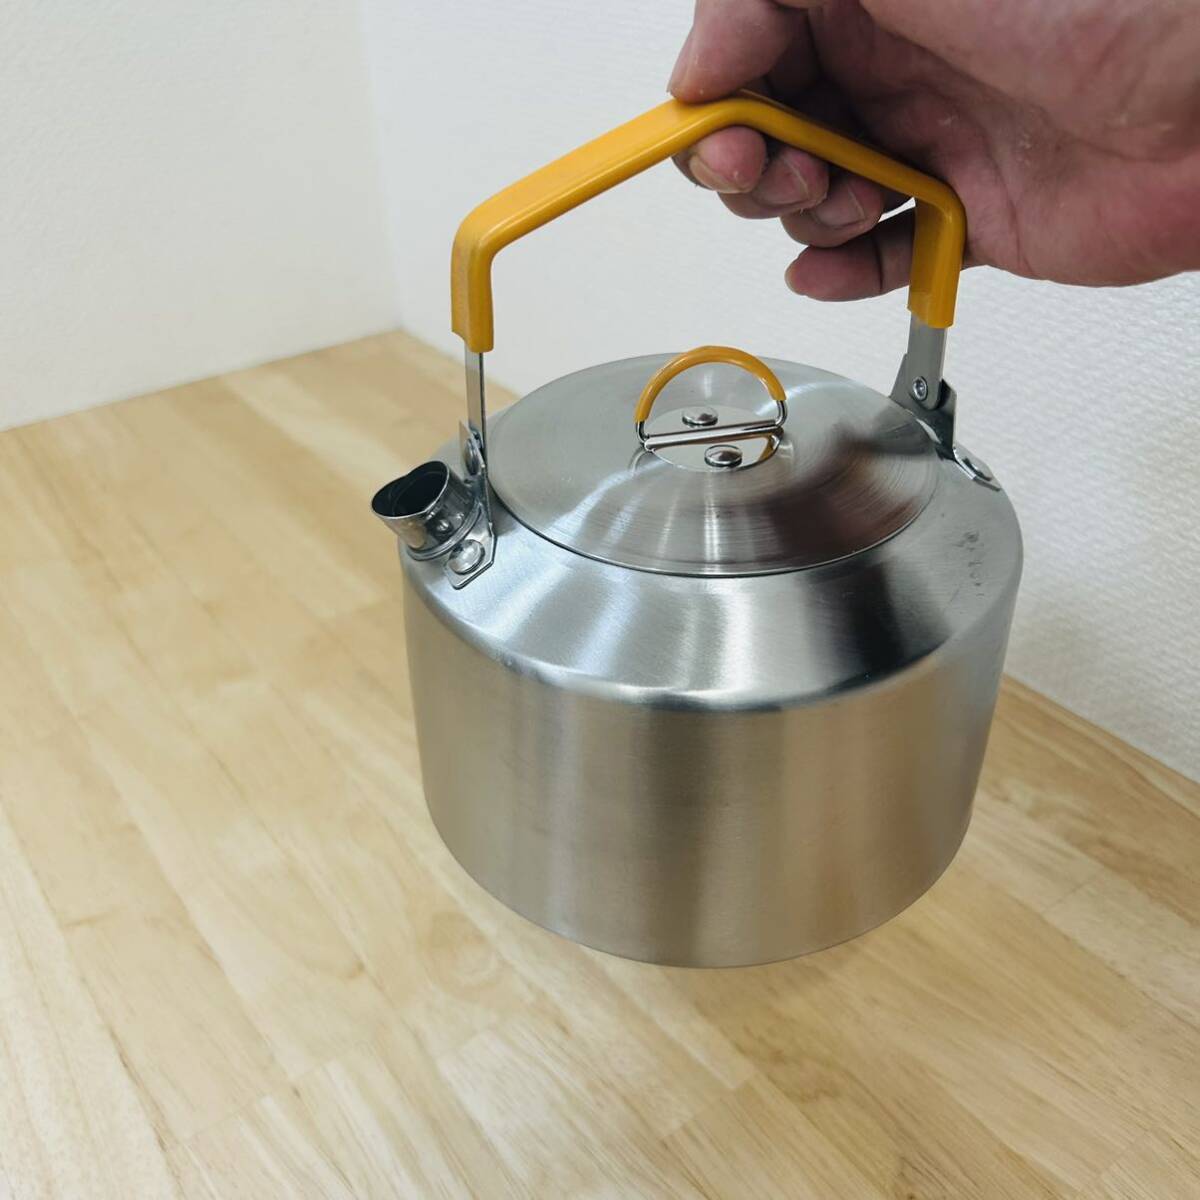  high capacity 1.5L made of stainless steel kettle tea kettle .. water coffee teapot camp high King outdoor field mountain climbing 15×18.5cm storage attaching 